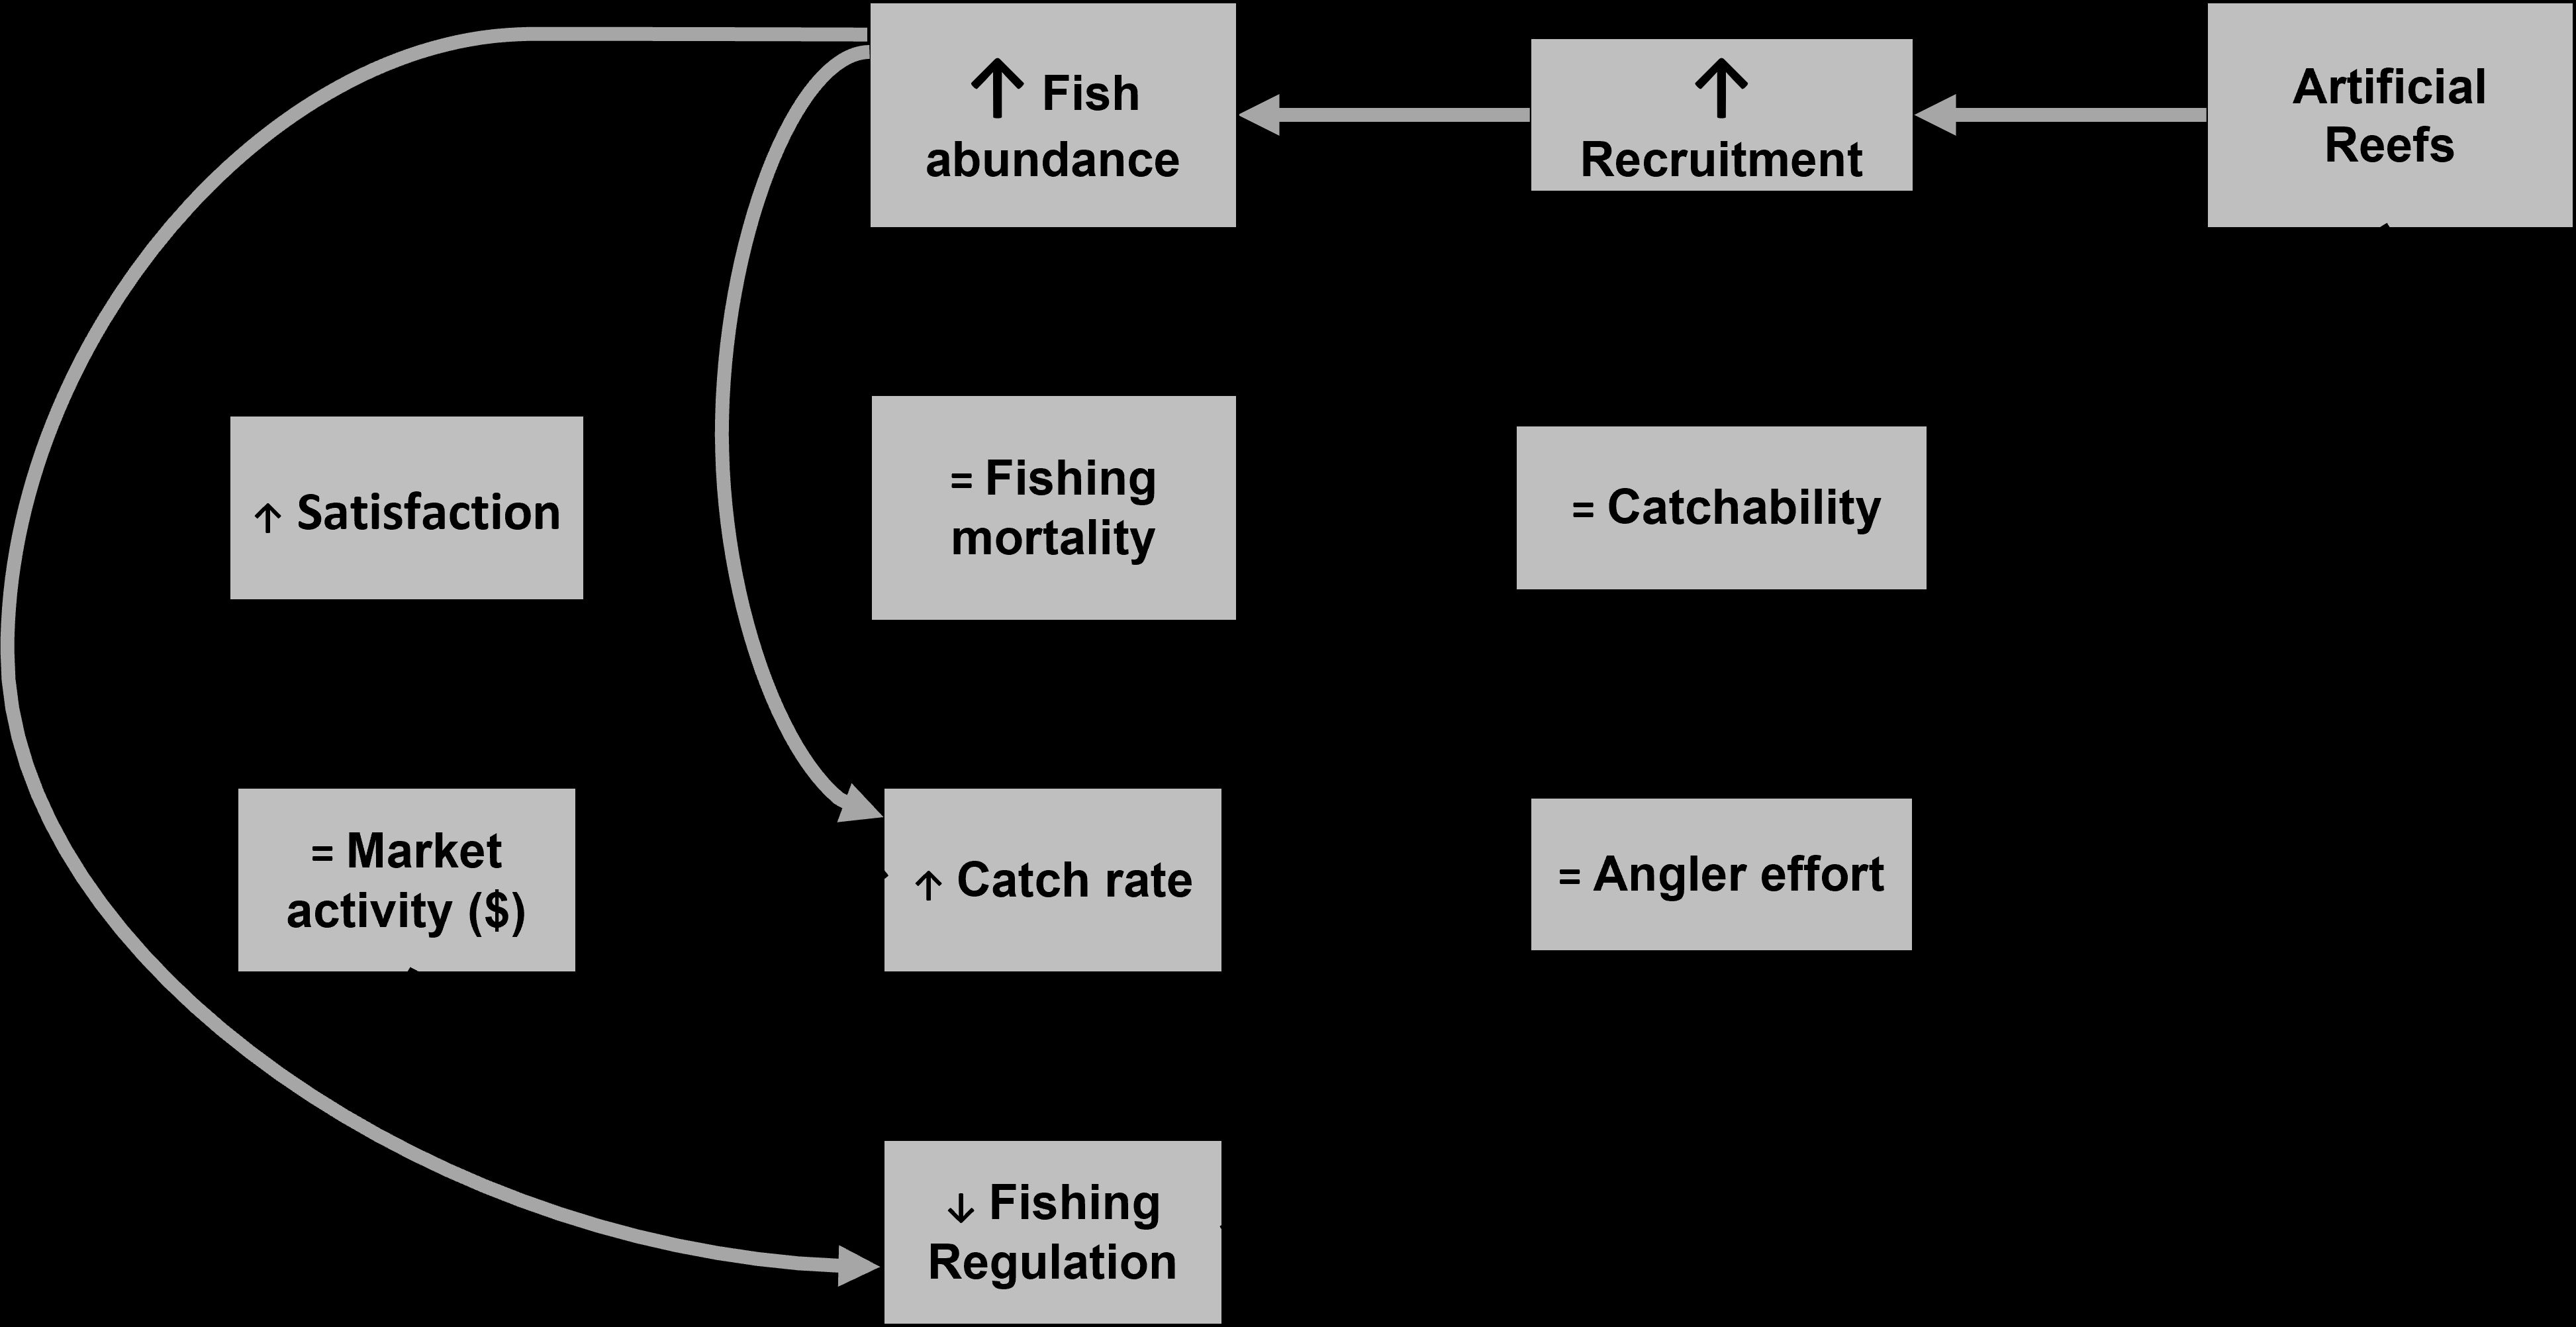 Example of how artificial reefs serve as good fish habitat but not good fishing spots. Fish abundance would increase through increased recruitment. This will likely happen if fishers do not fish at artificial reefs. The grey arrows at the very top are fish effects, and the black arrows are fisher effects. The up arrows in the boxes show an increase in a metric, the down arrow shows a decrease in a metric, and a “=” shows no change. Within the boxes, a large arrow shows a larger change, and a small arrow shows a smaller change. What this figure shows is that if artificial reefs only affected fish and not fishers, there would be some positive ecological effects and limited socioeconomic effects (satisfaction but not market activity would increase).